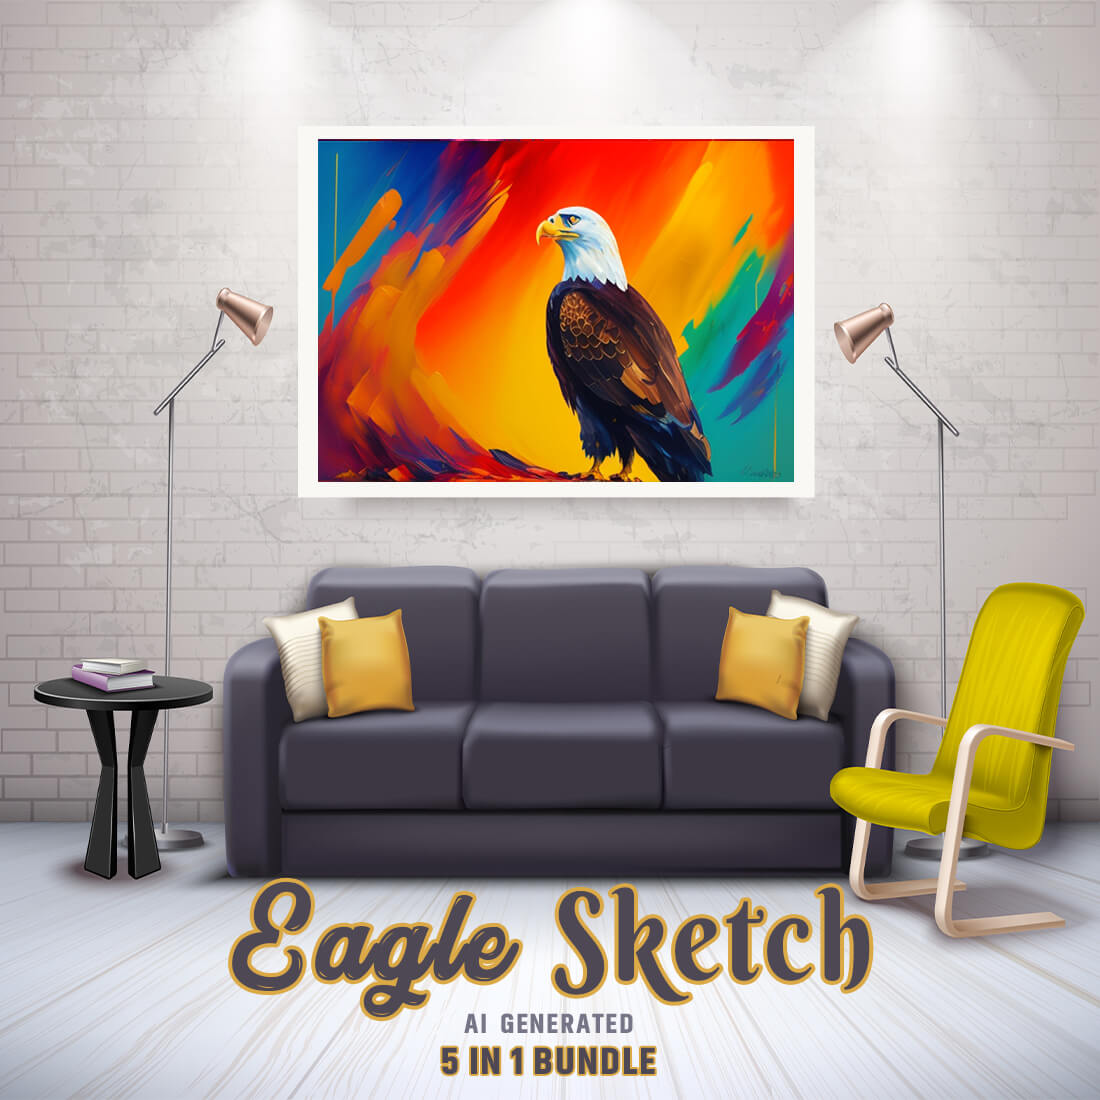 Free Creative & Cute Eagle Watercolor Painting Art Vol 10 cover image.